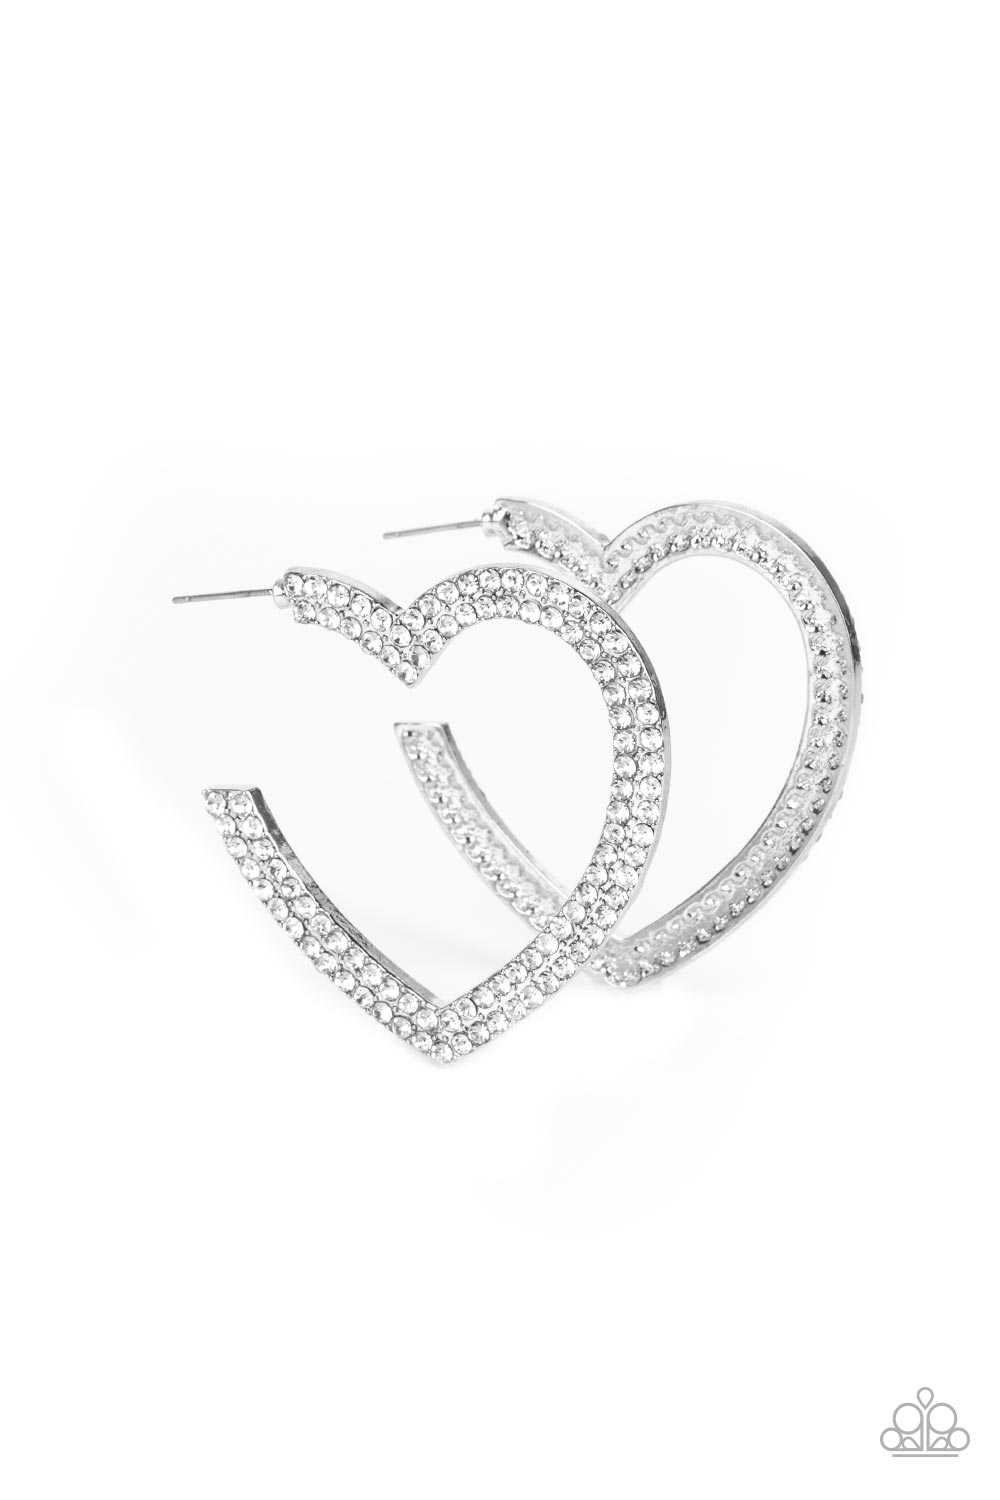 AMORE to Love - White Heart Earrings - Paparazzi Accessories - Alies Bling Bar